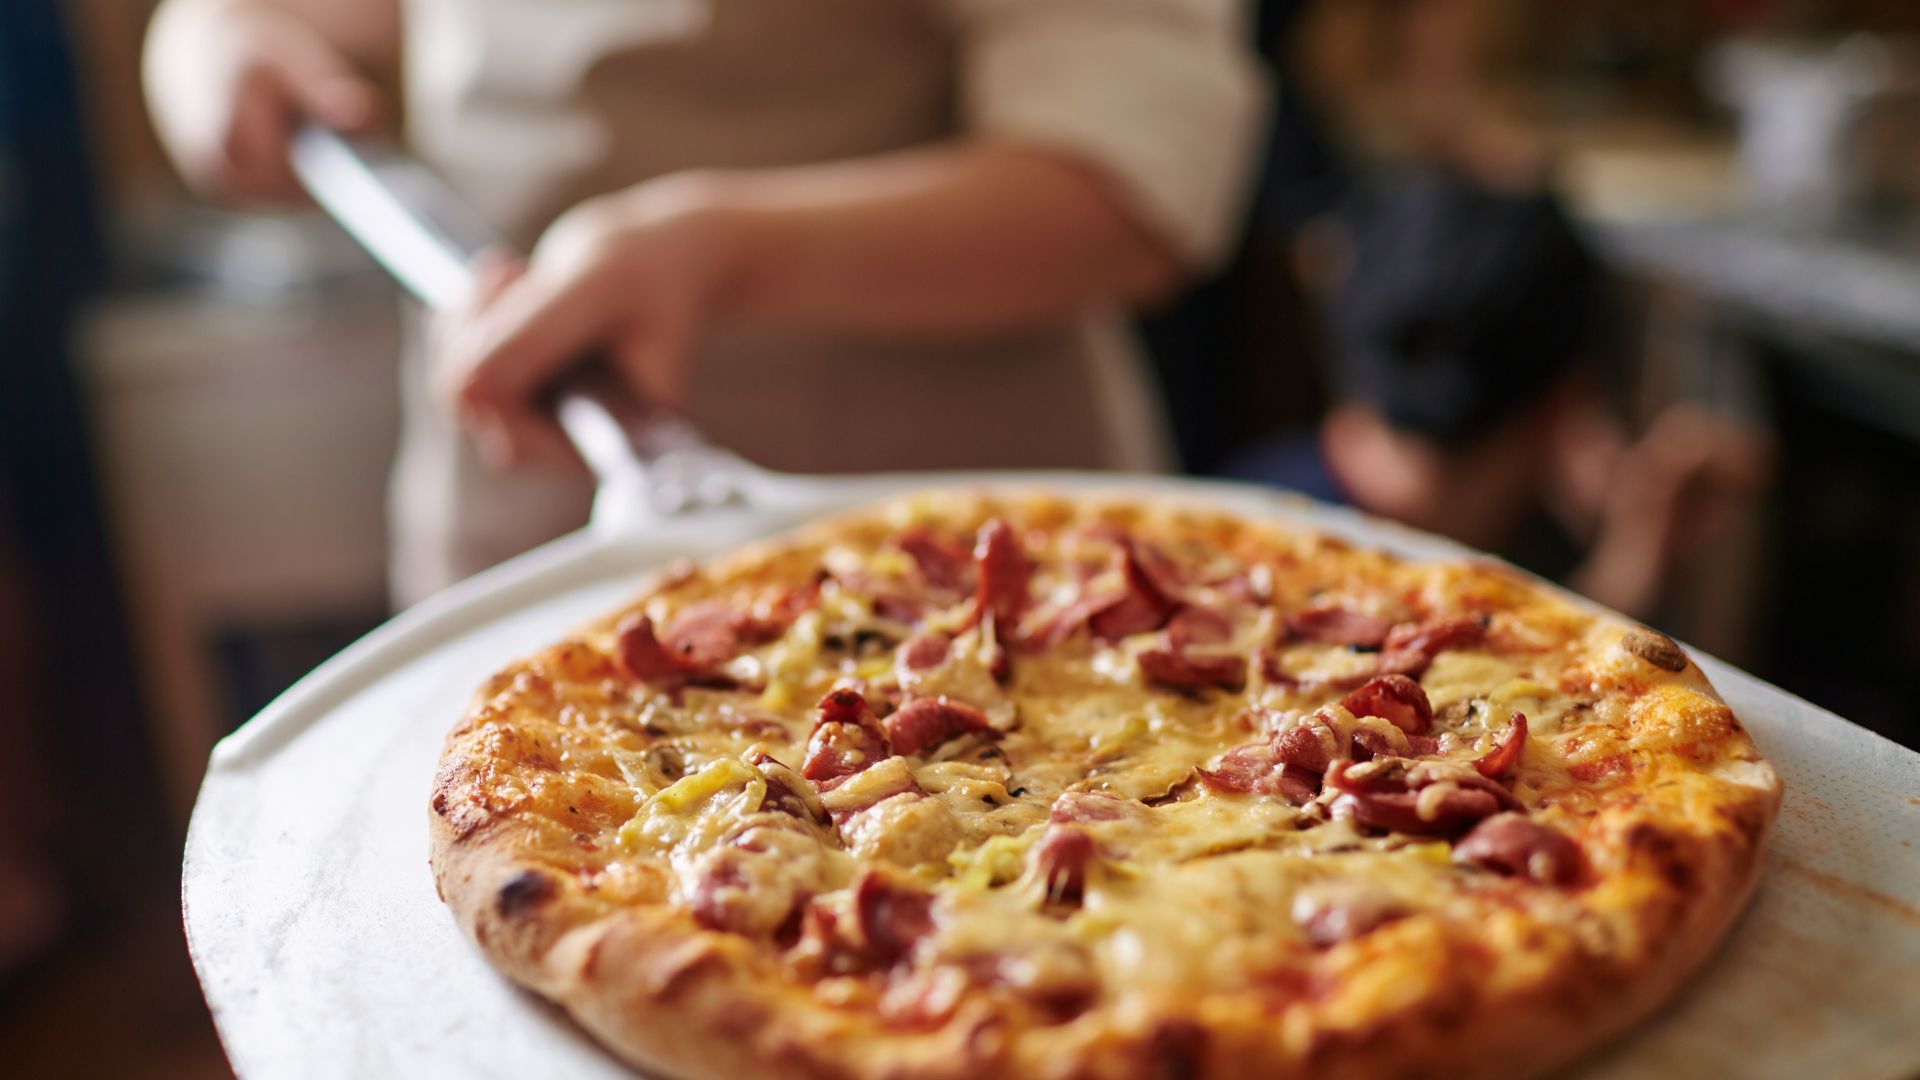 How Much Do Pizza Delivery Drivers Make?